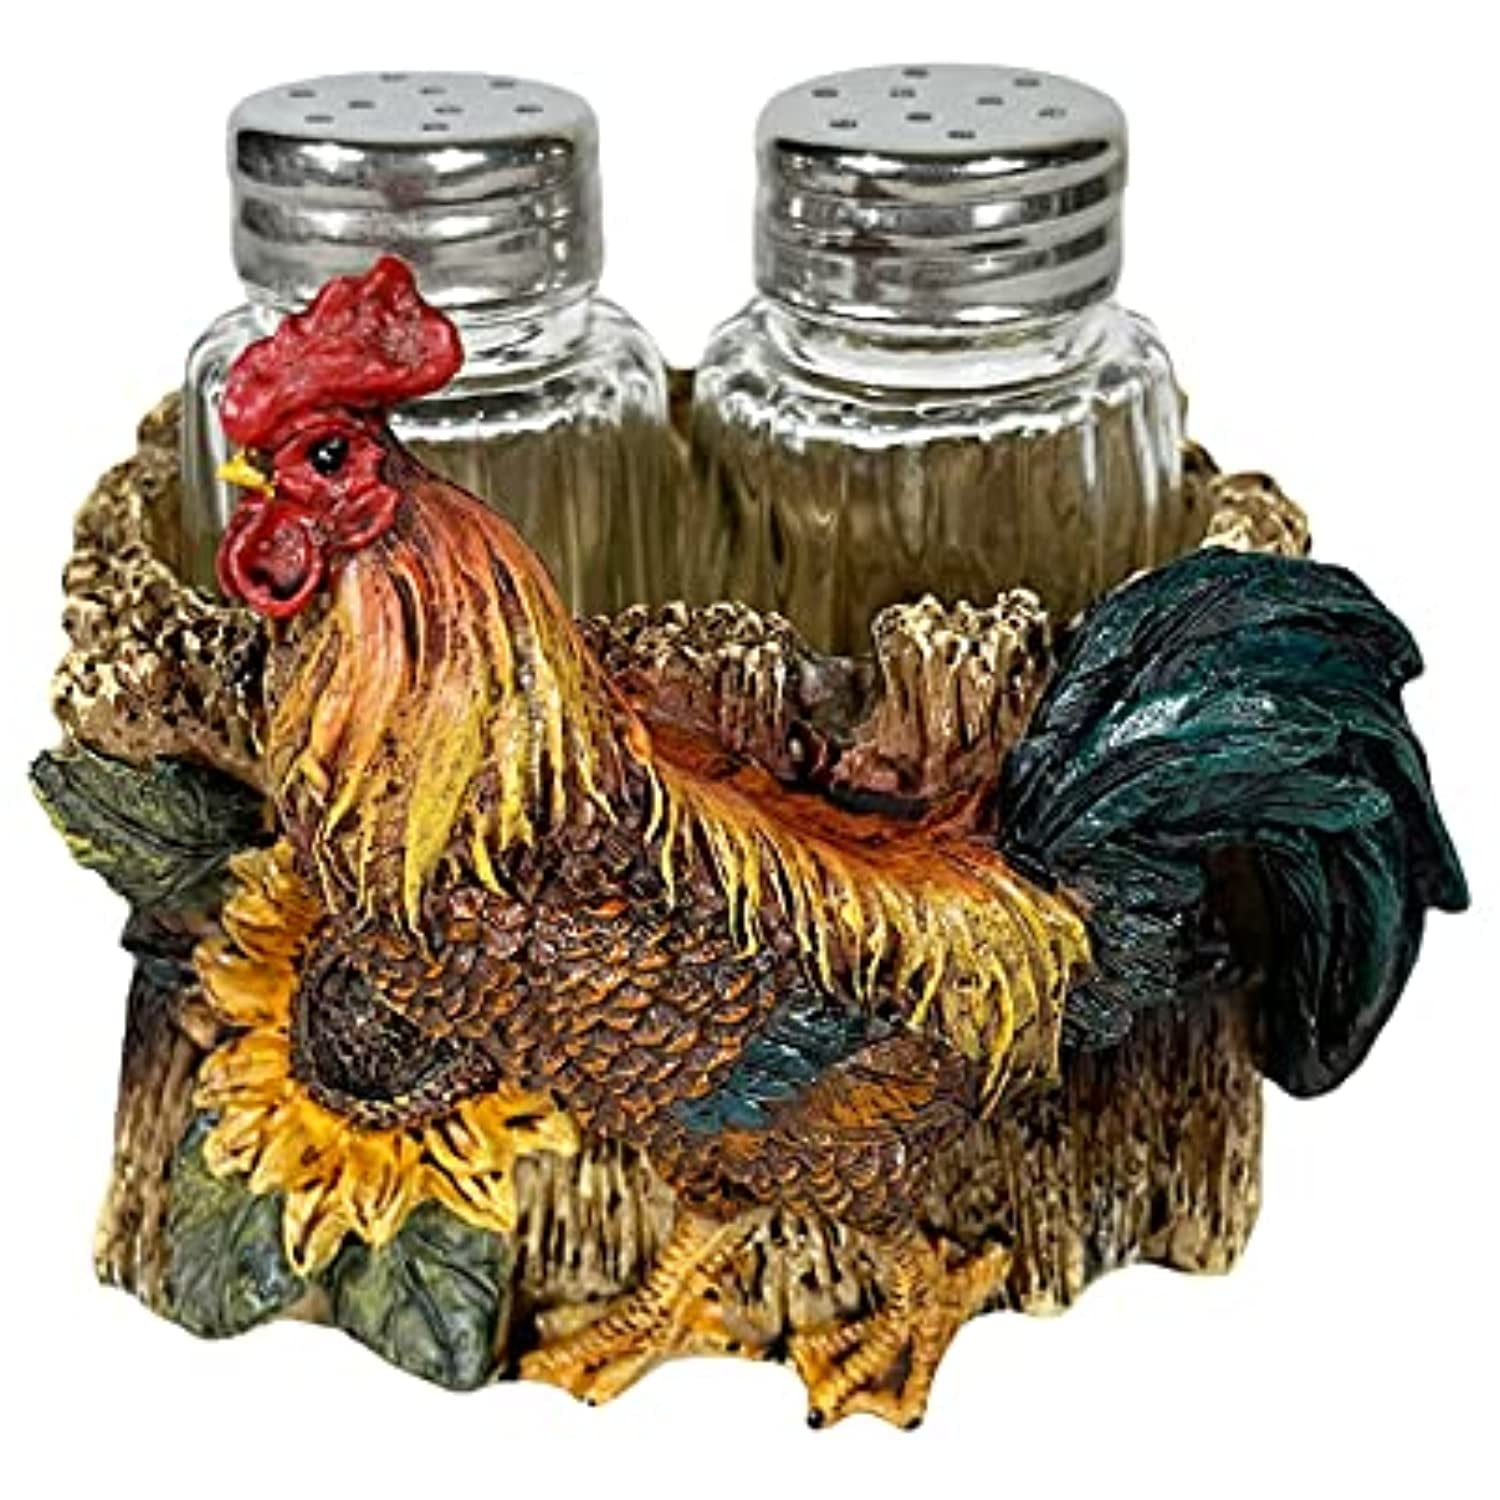 Glass Salt and Pepper Shakers Rooster Figurine Country Farm House Decor Set 